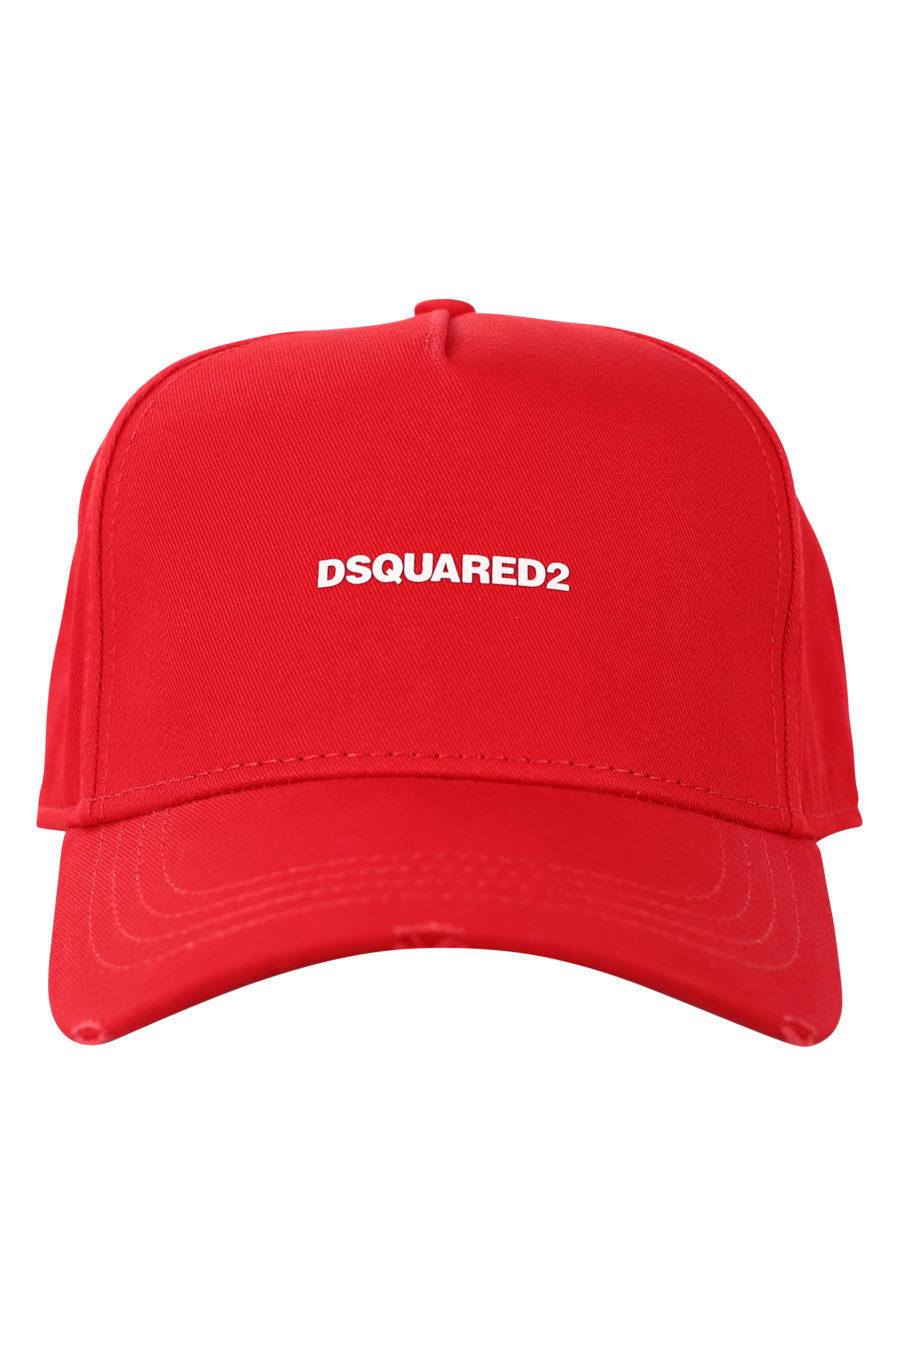 Adjustable red cap with small white logo - IMG 0469